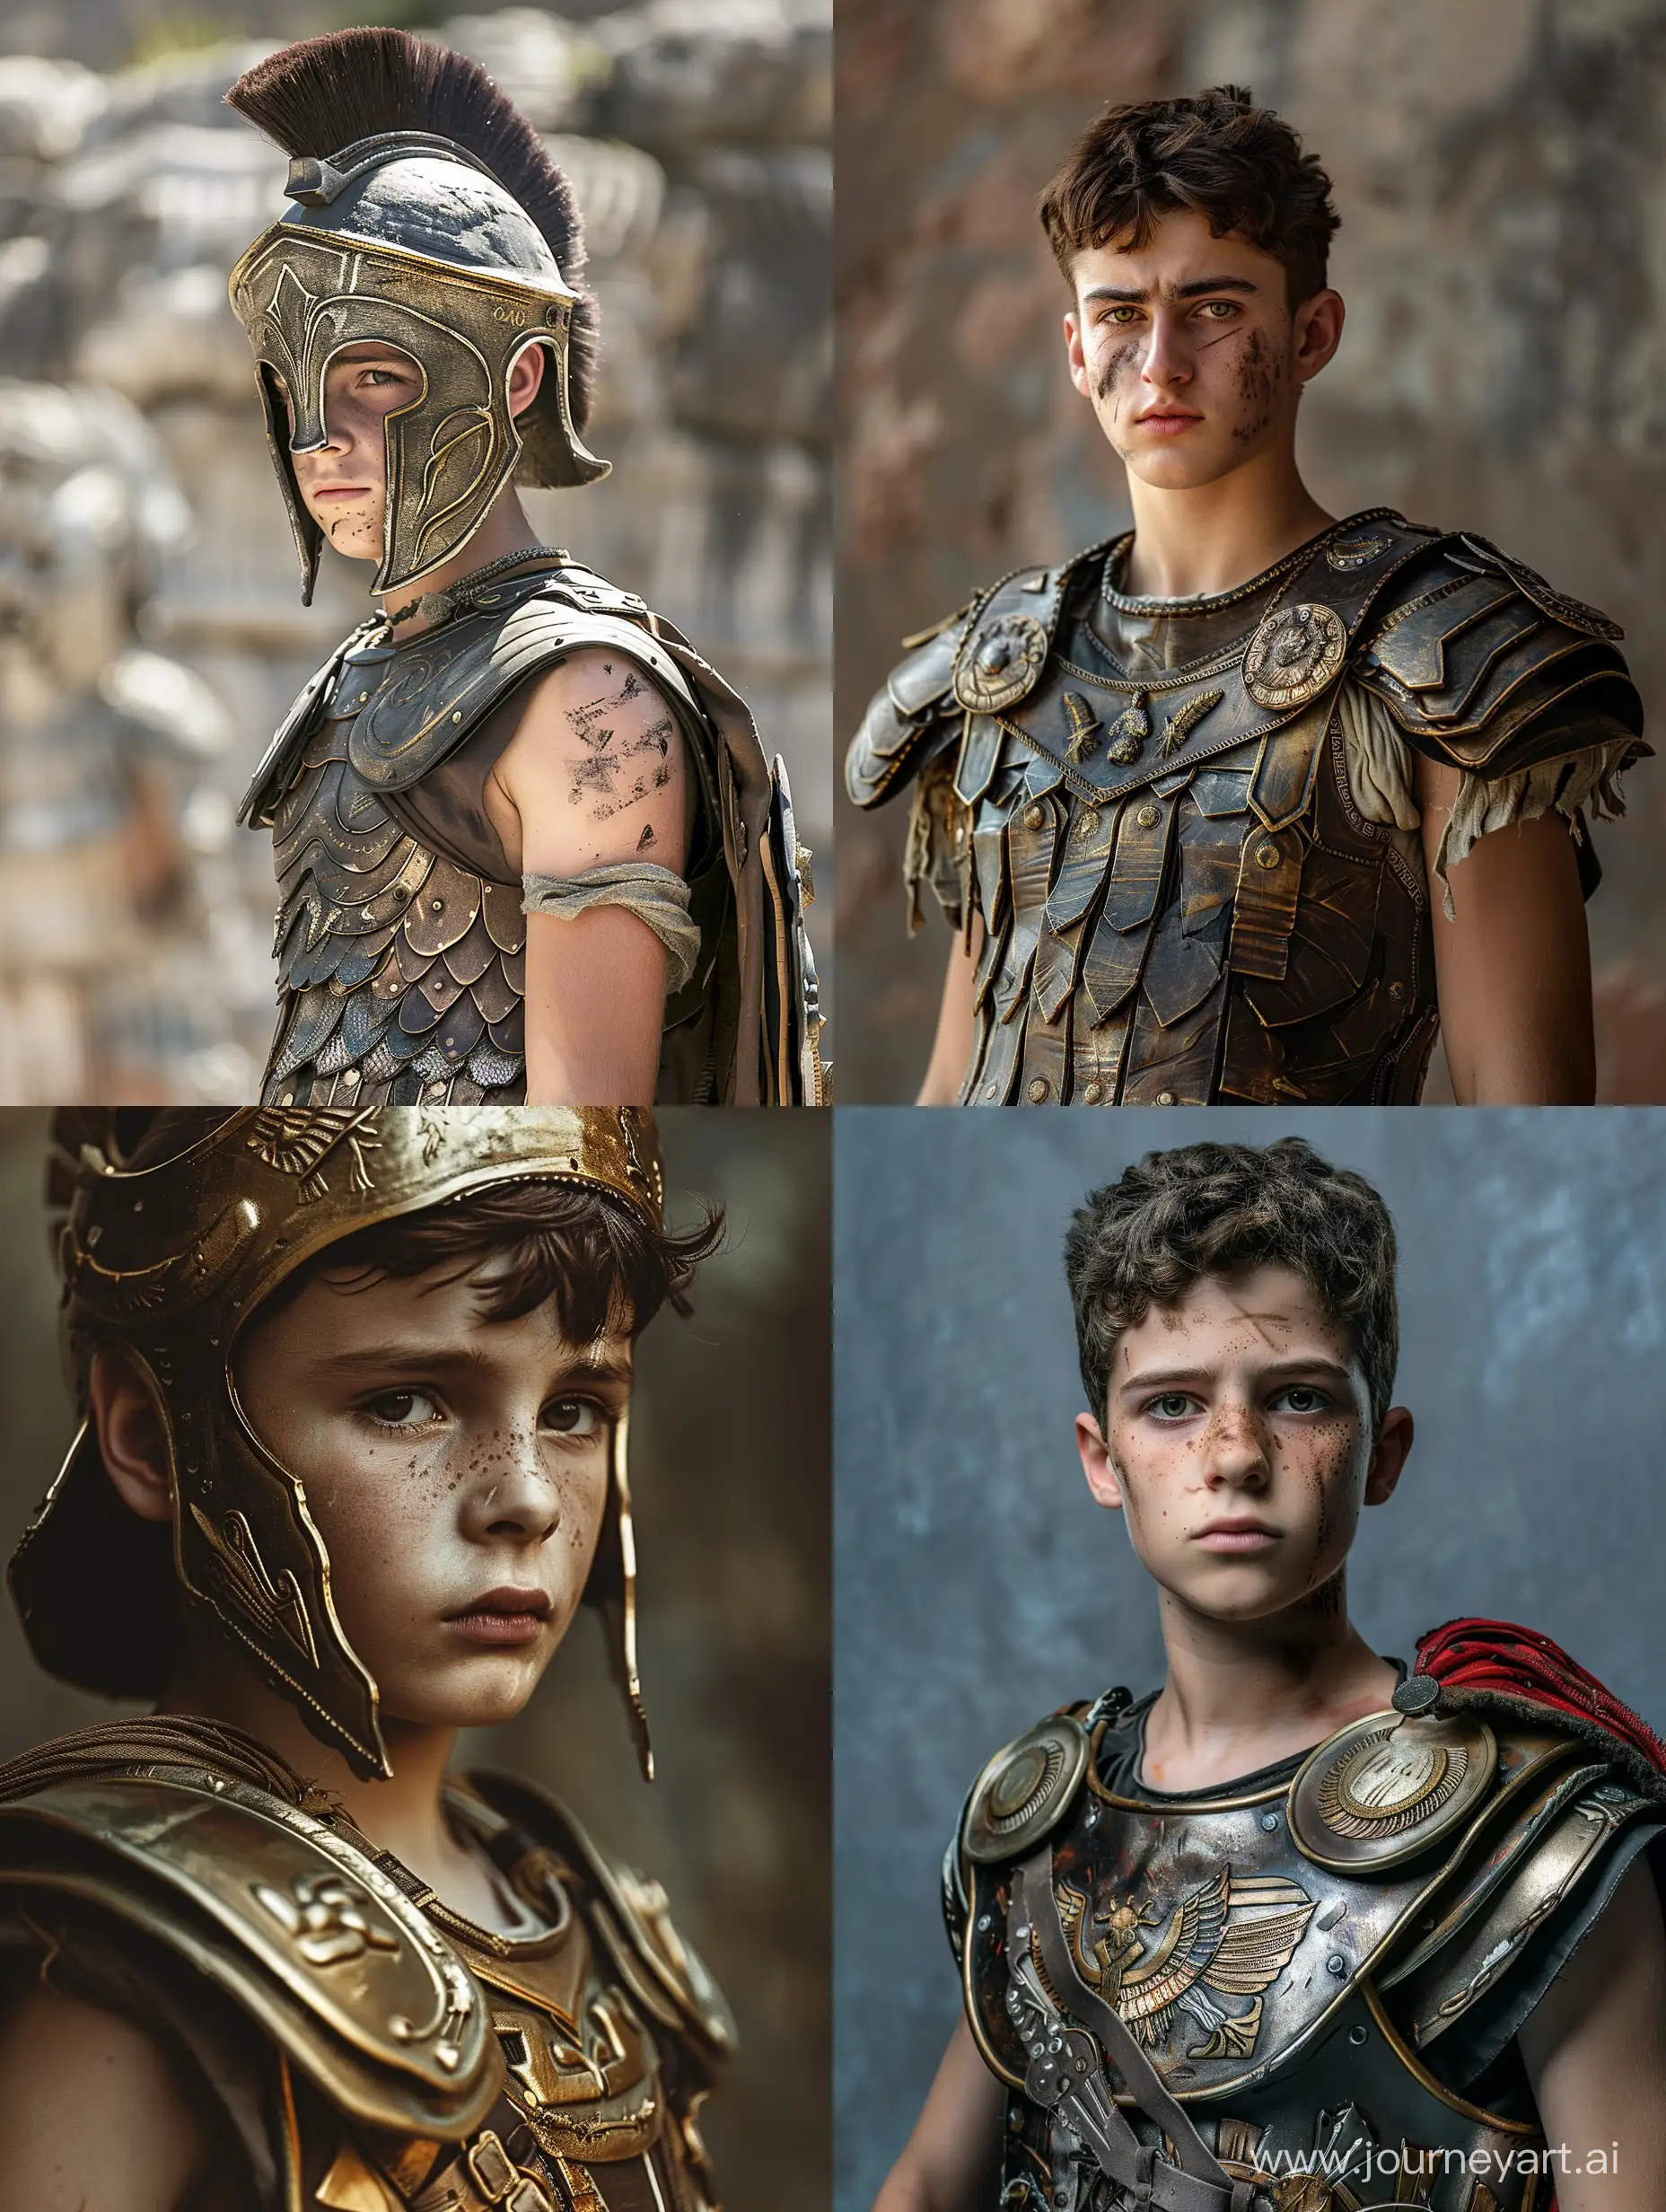 A young Greek warrior in his realistic war armor.